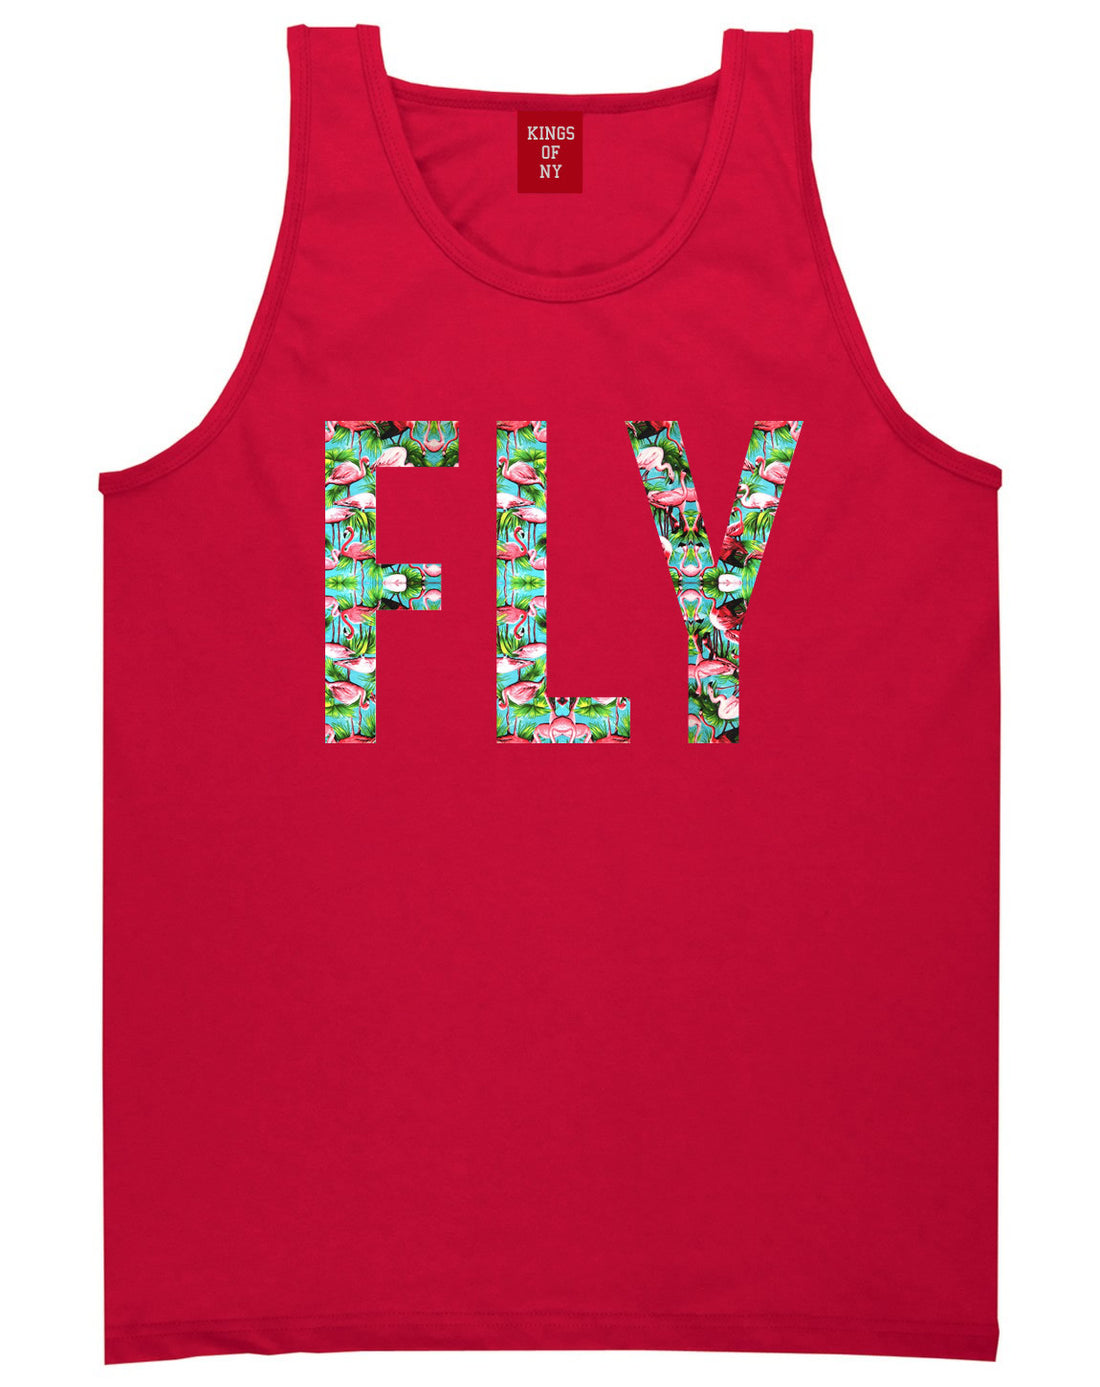 FLY Flamingo Print Summer Wild Society Tank Top In Red by Kings Of NY